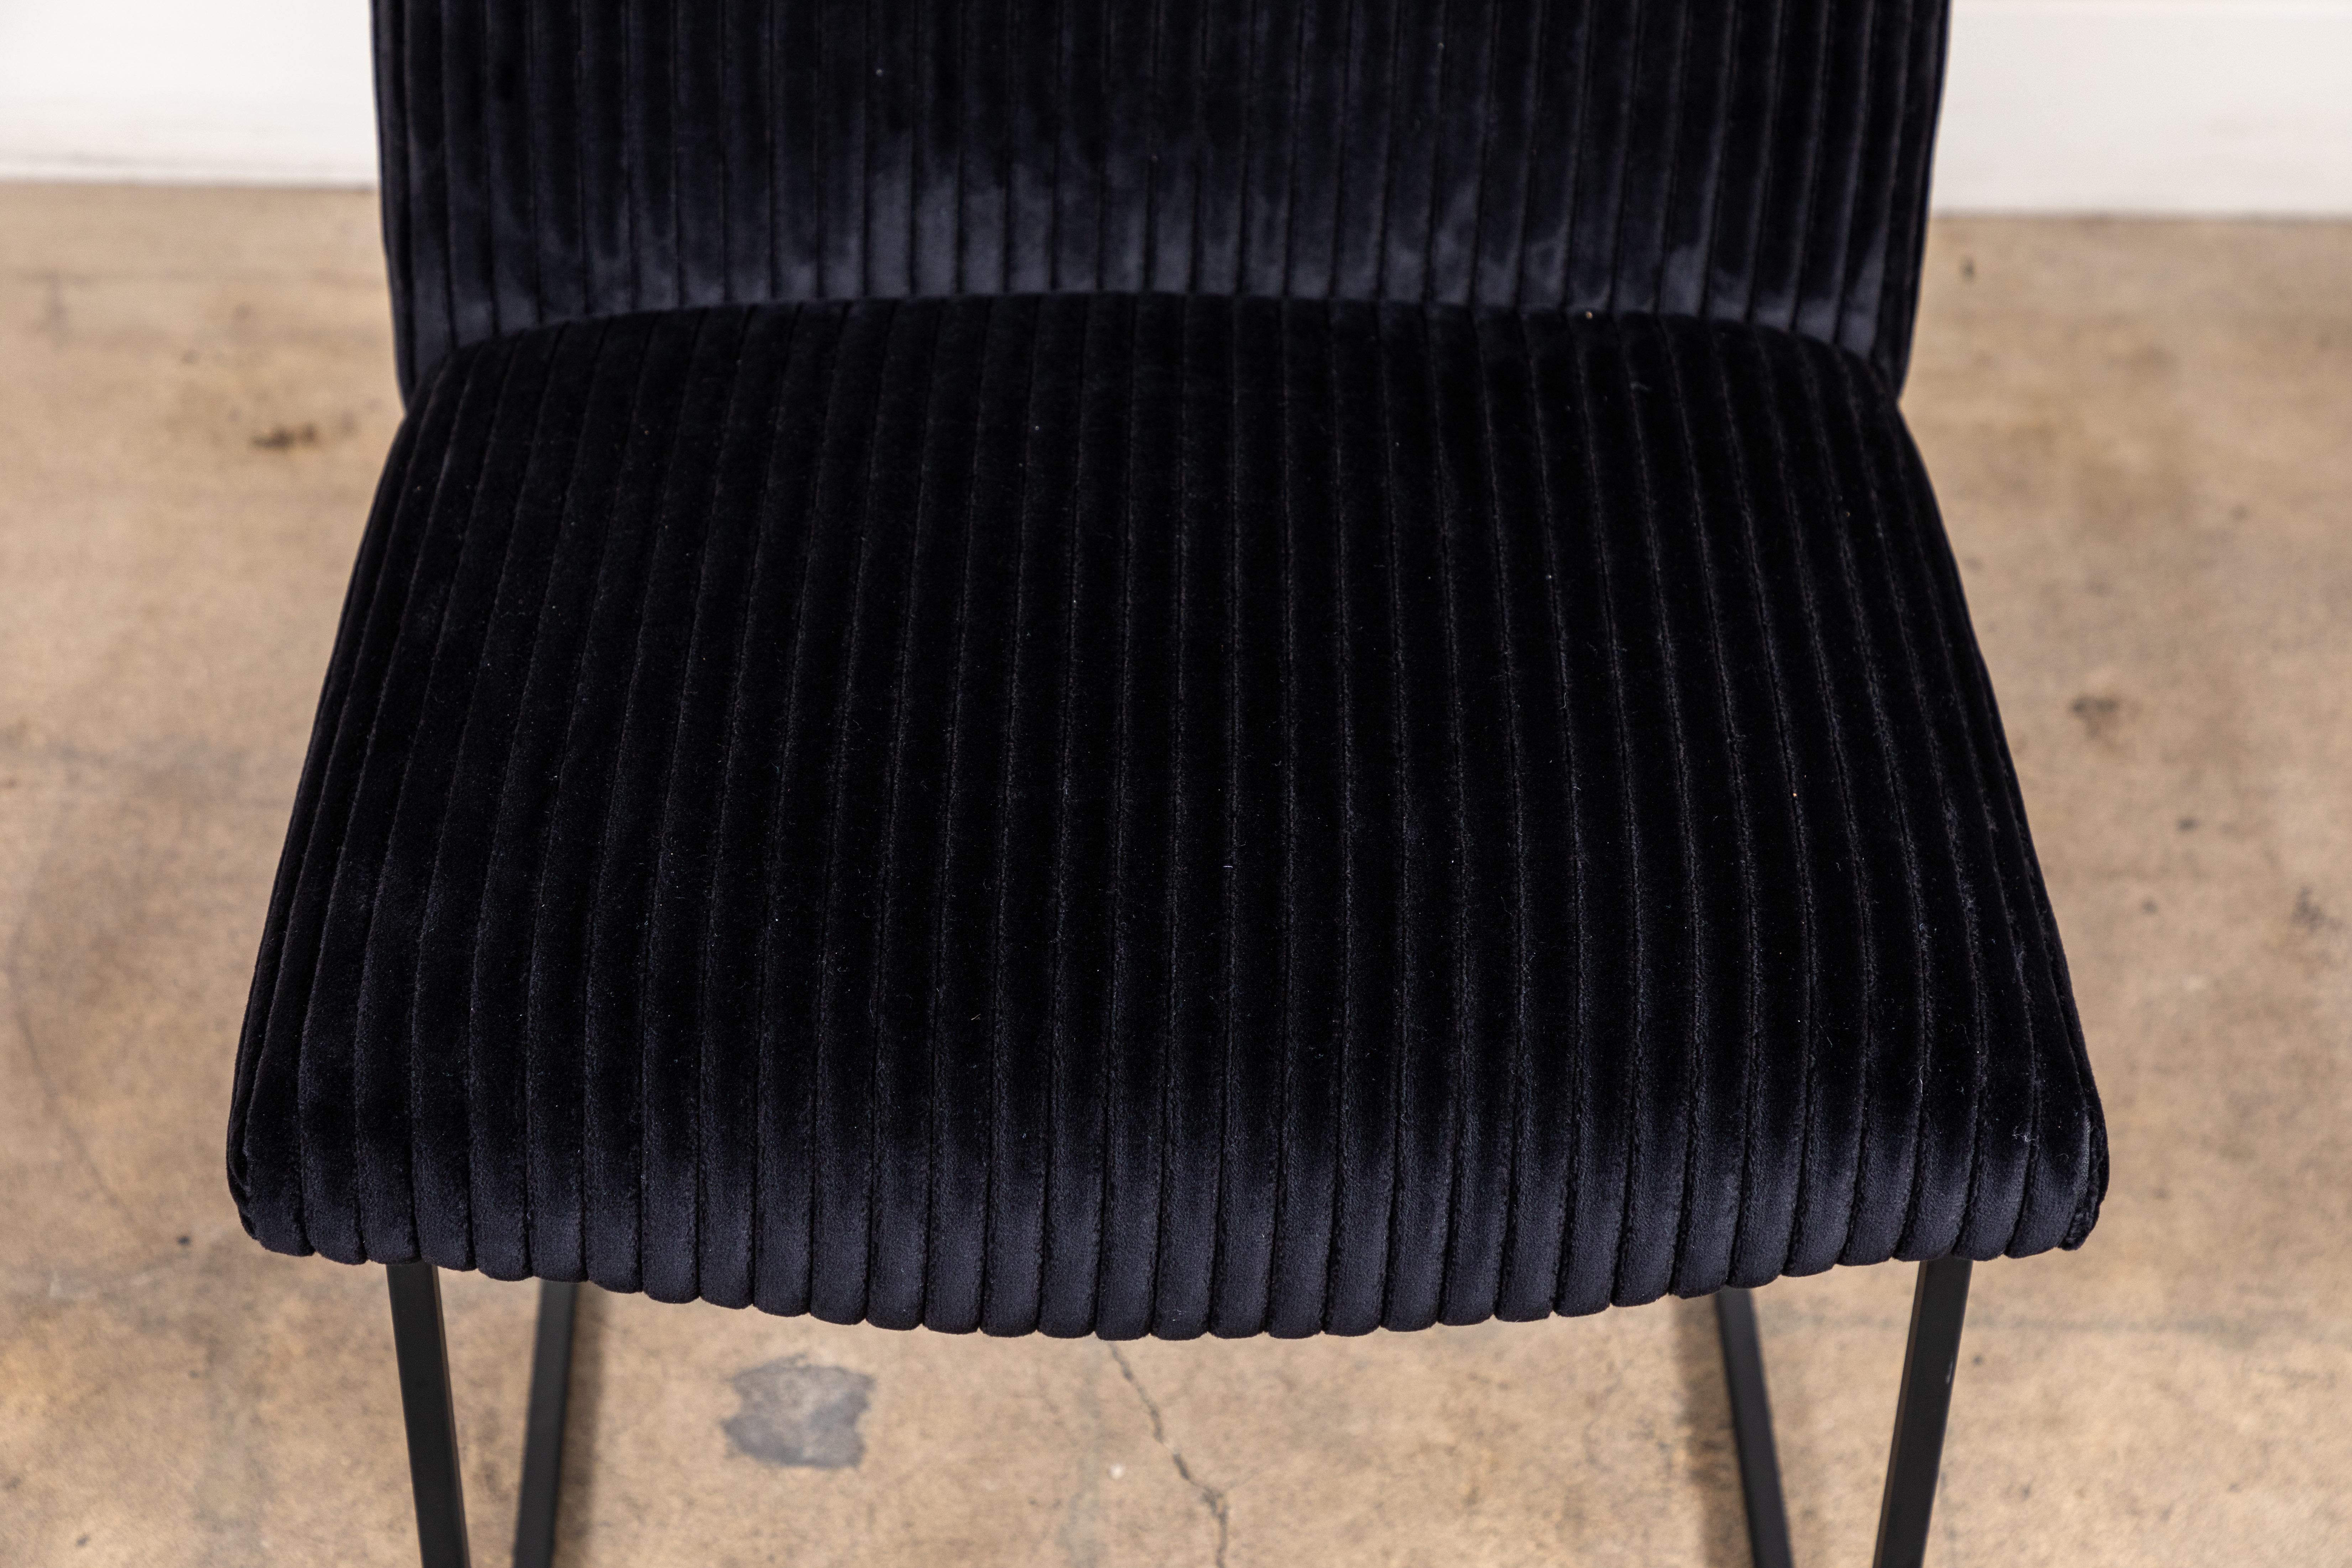 The thin frame dining chair features a high back and an armless silhouette that rest atop a thin metal base. Shown here in black wide whale corduroy and a matte black powder coat base.

Available to order in Customer’s Own Materials with a 6-8 week